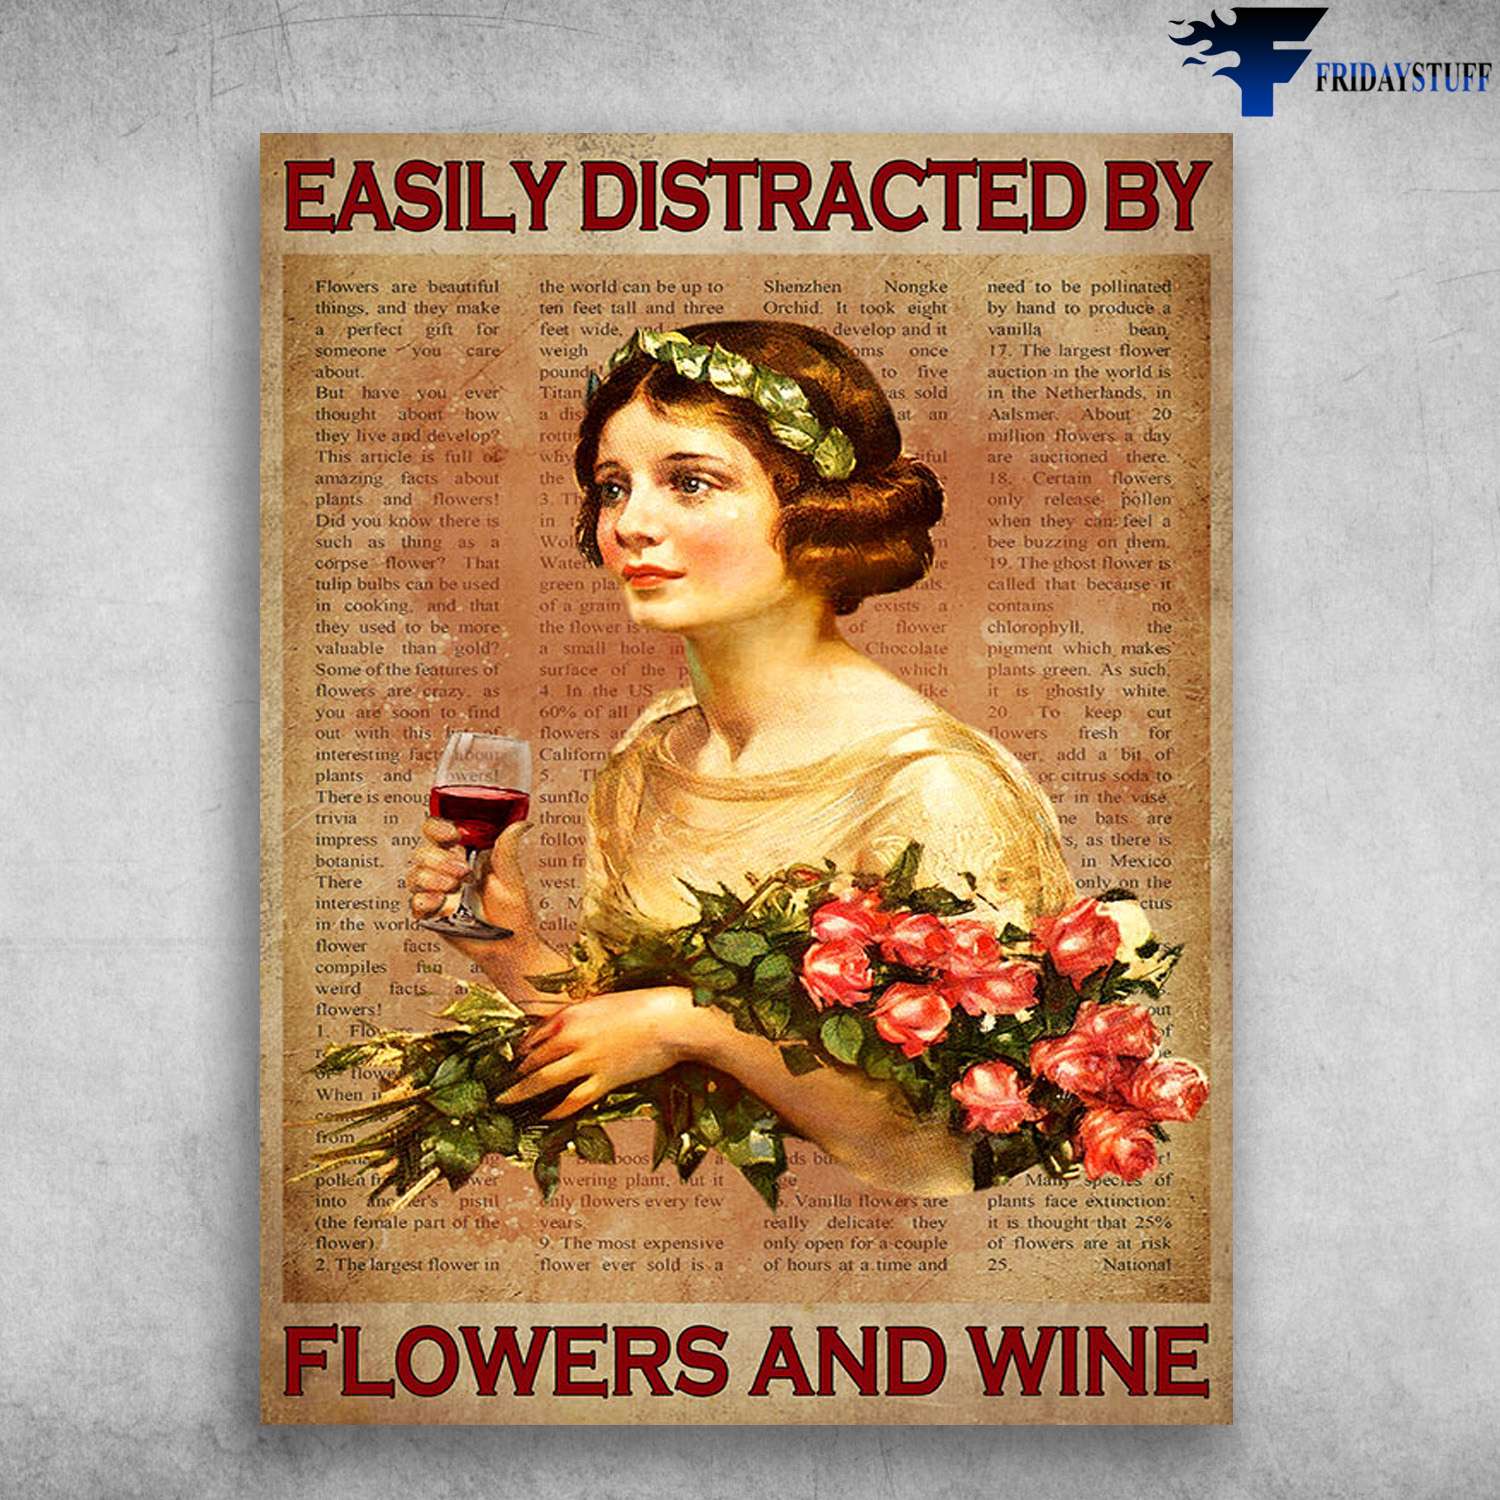 Flower Lover, Drink Wine - Easily Distracted By, Flowers And Wine